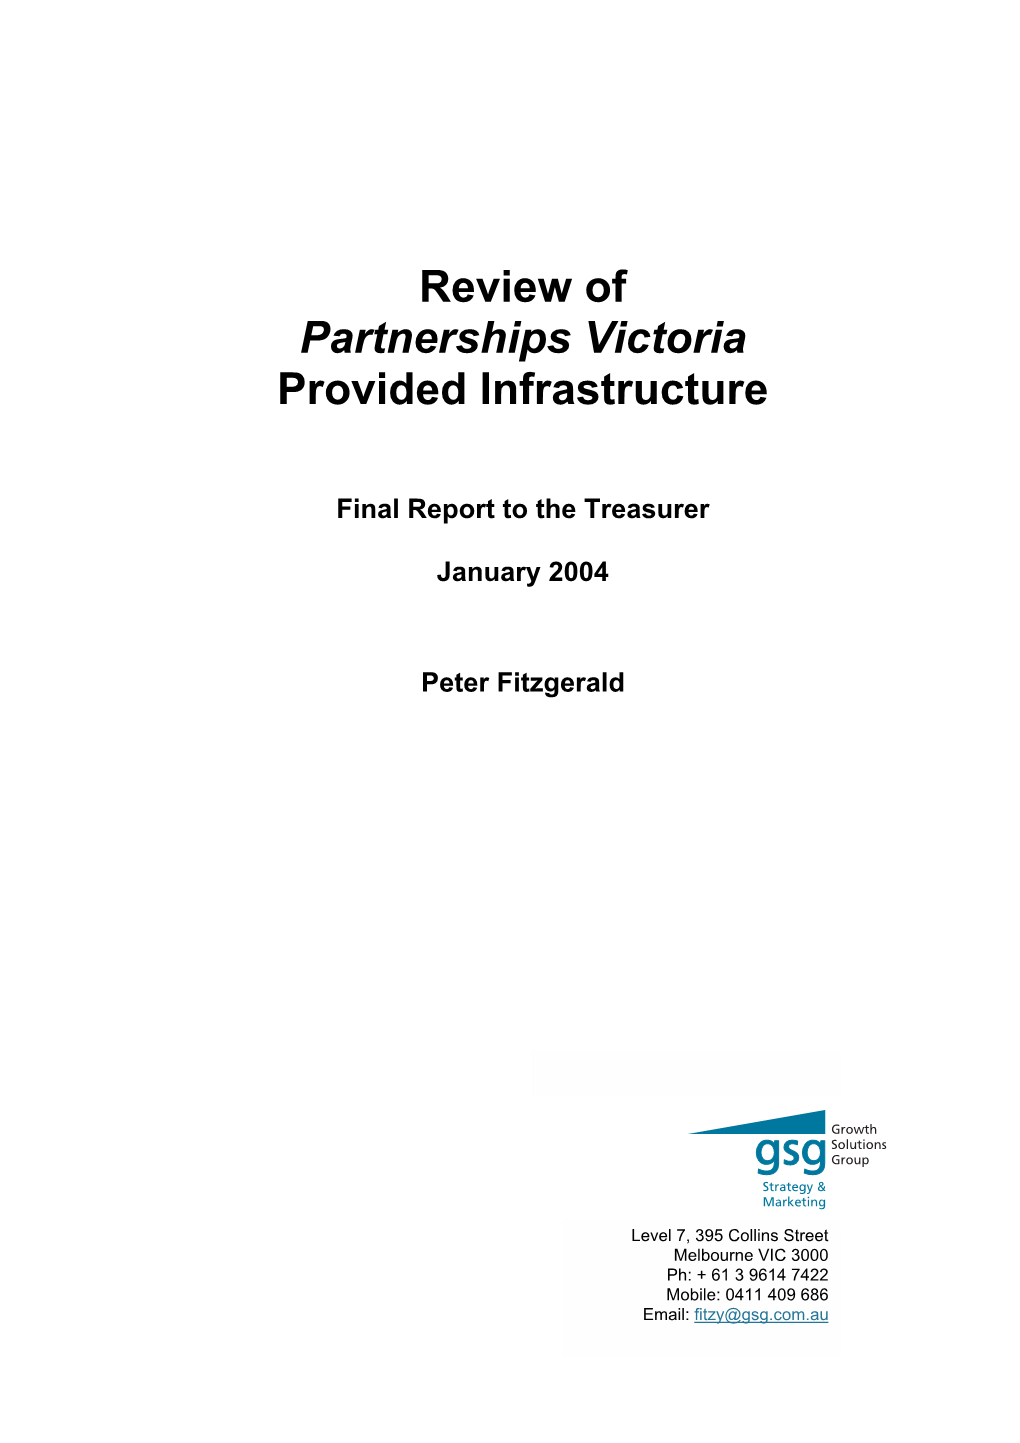 Review of Partnerships Victoria Provided Infrastructure